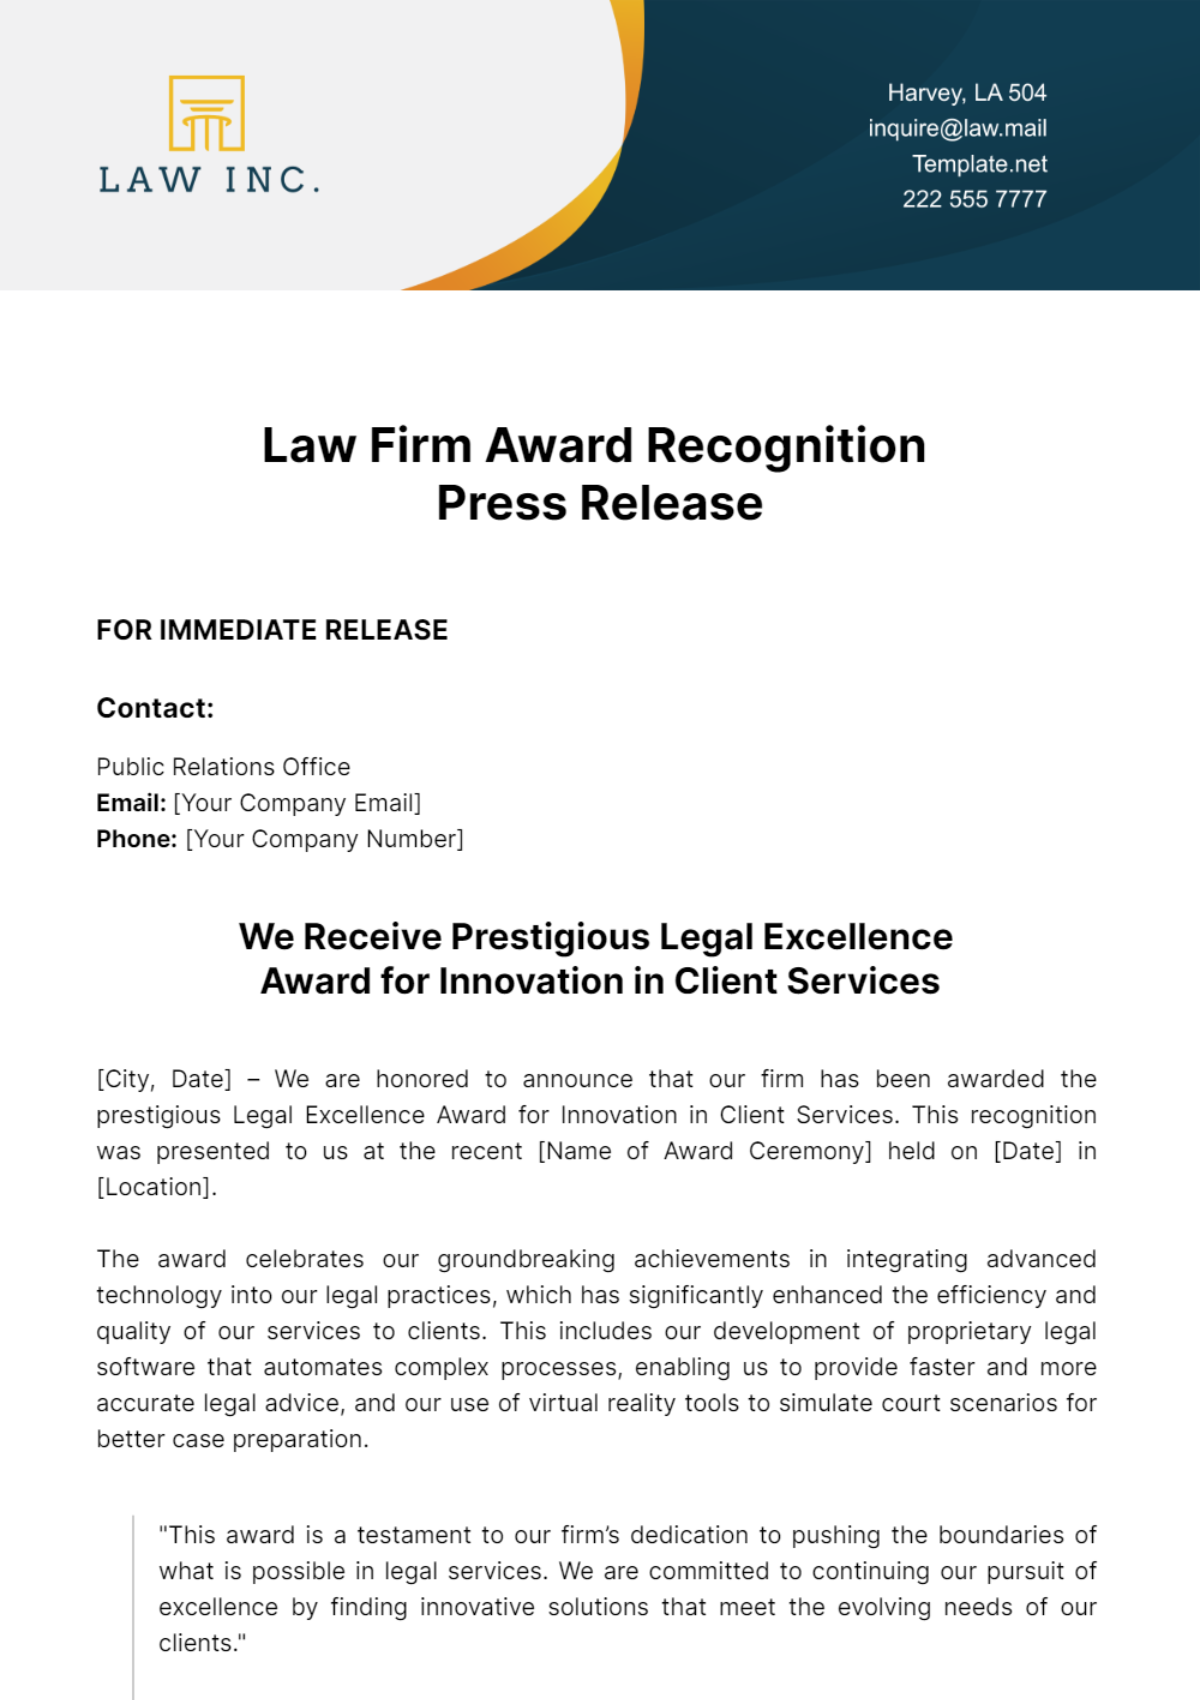 Free Law Firm Award Recognition Press Release Template